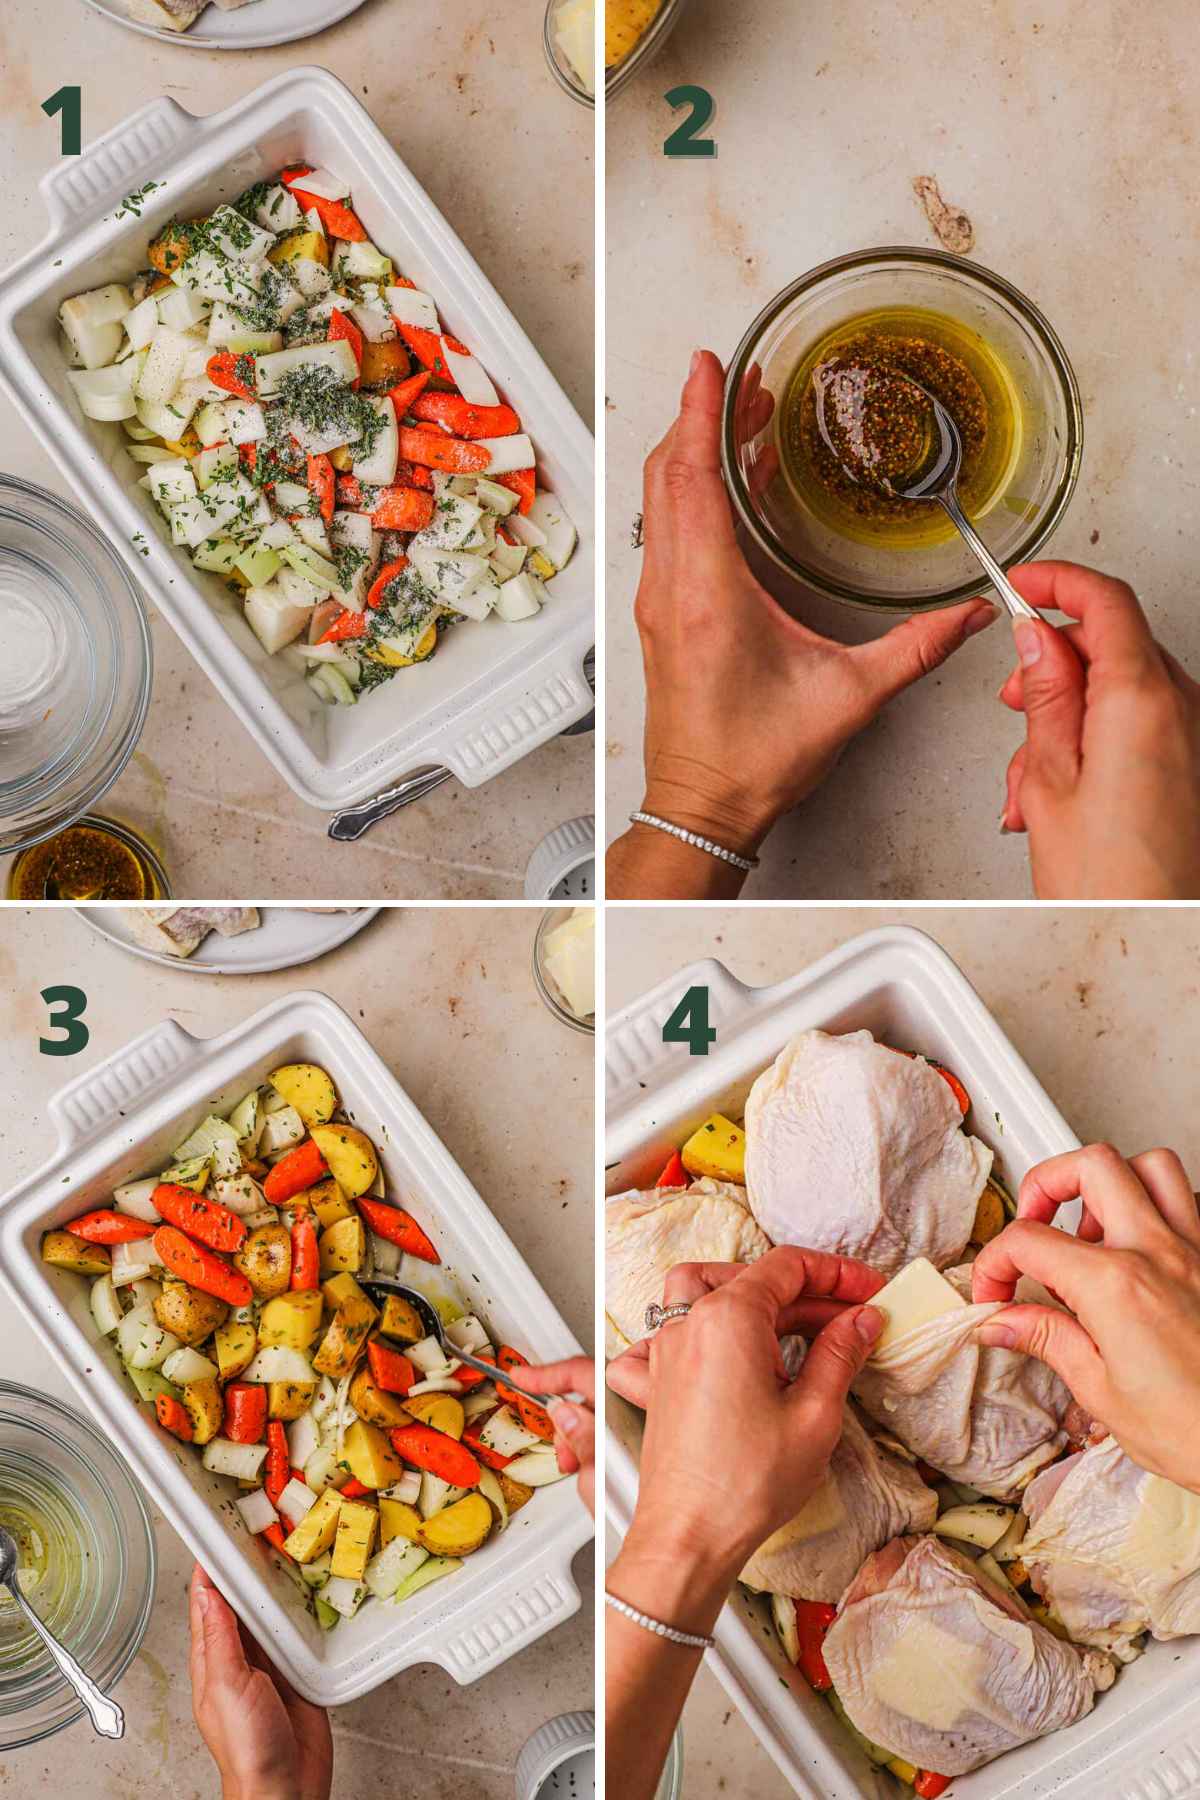 Steps to make roasted chicken; add carrots, onion, potatoes, rosemary; mix mustard, honey, olive oil; drizzle on veggies; add chicken, tuck butter under skin.